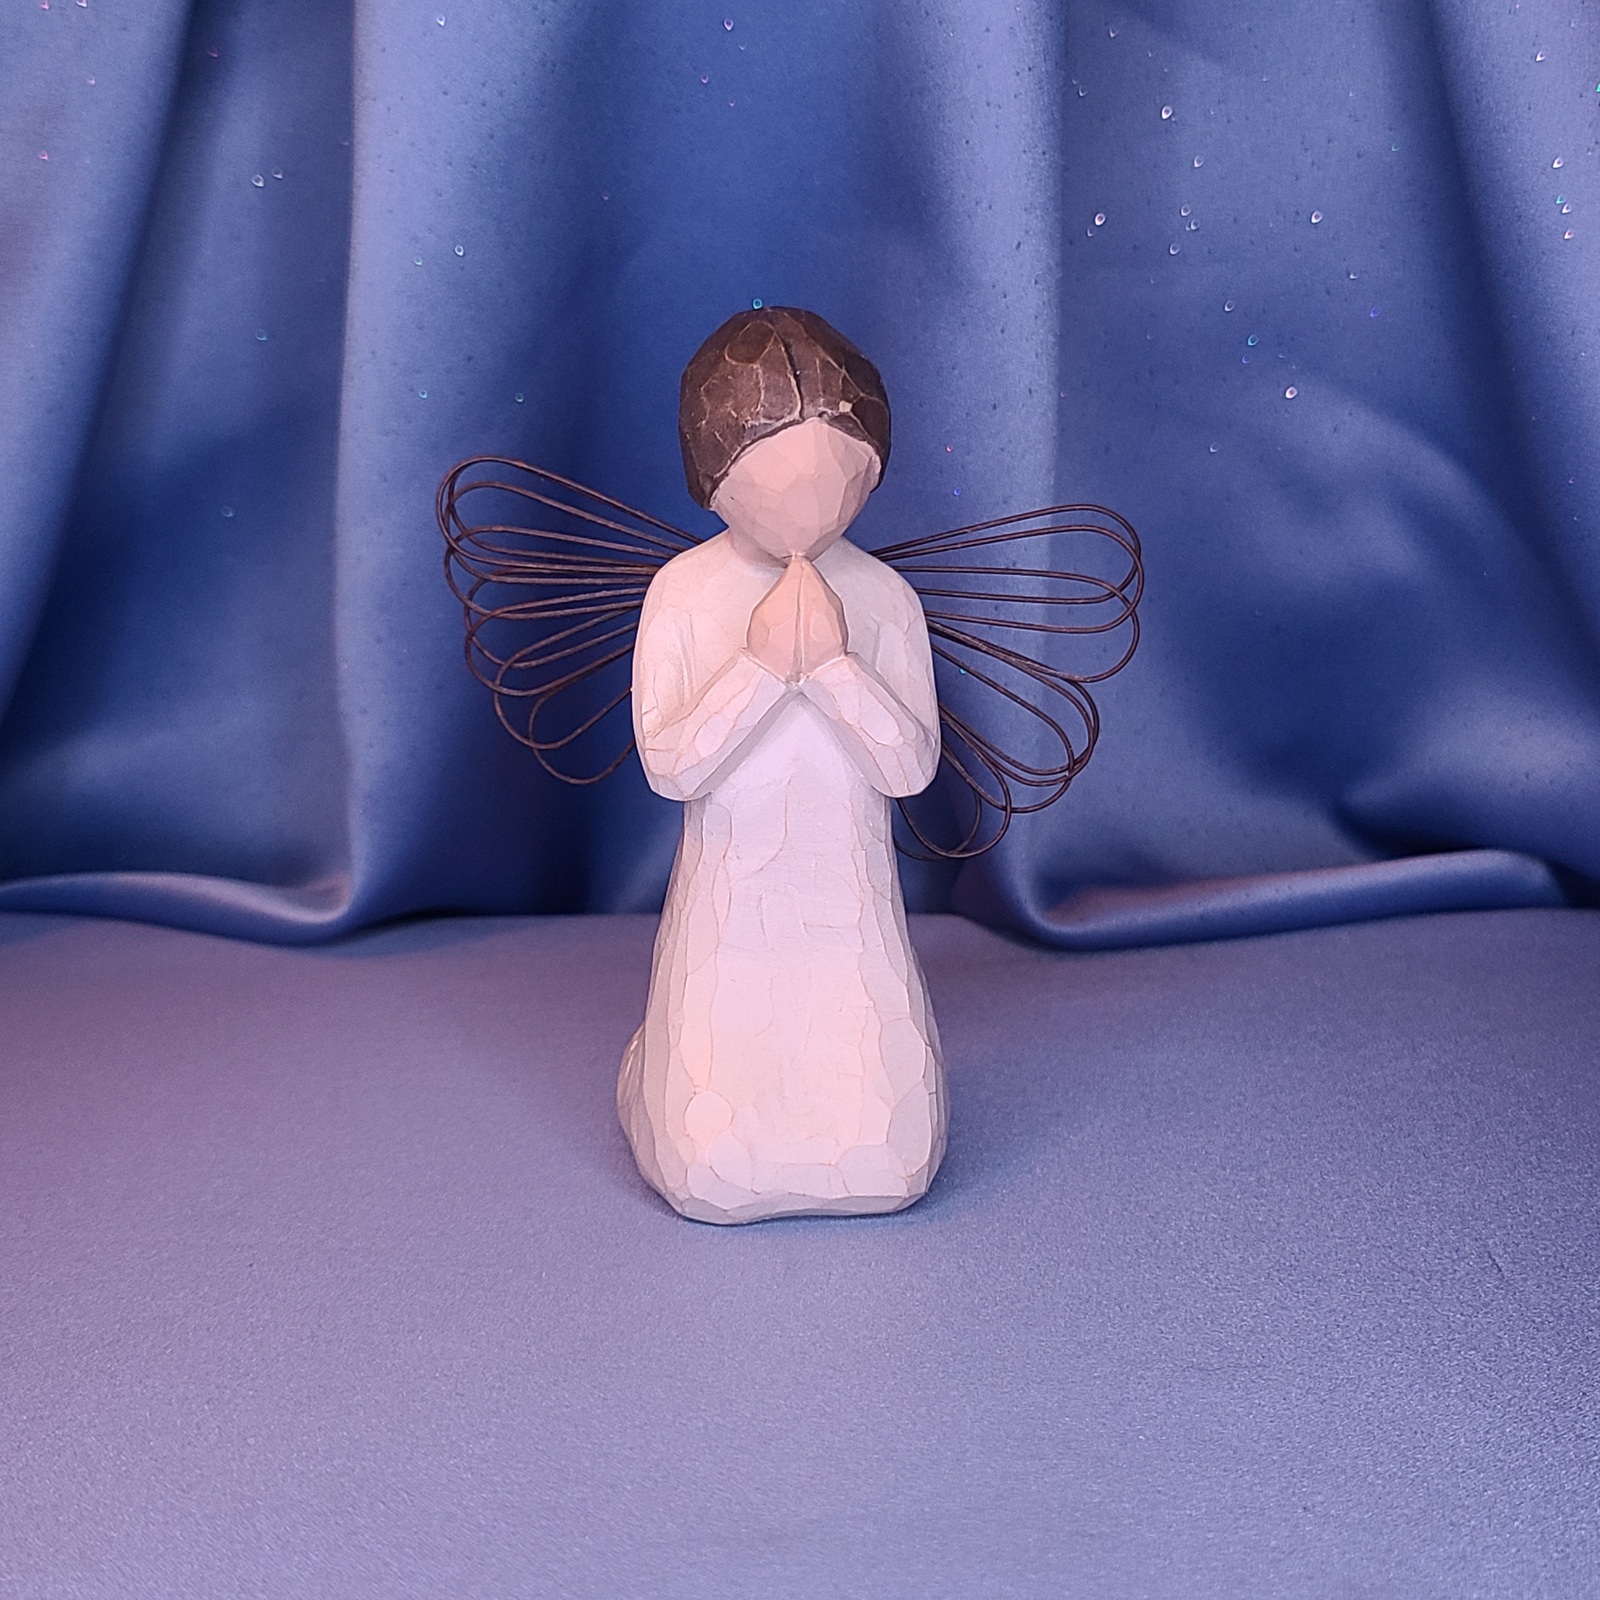 Primary image for Willow Tree "Angel of Prayer" Figurine by Demdaco